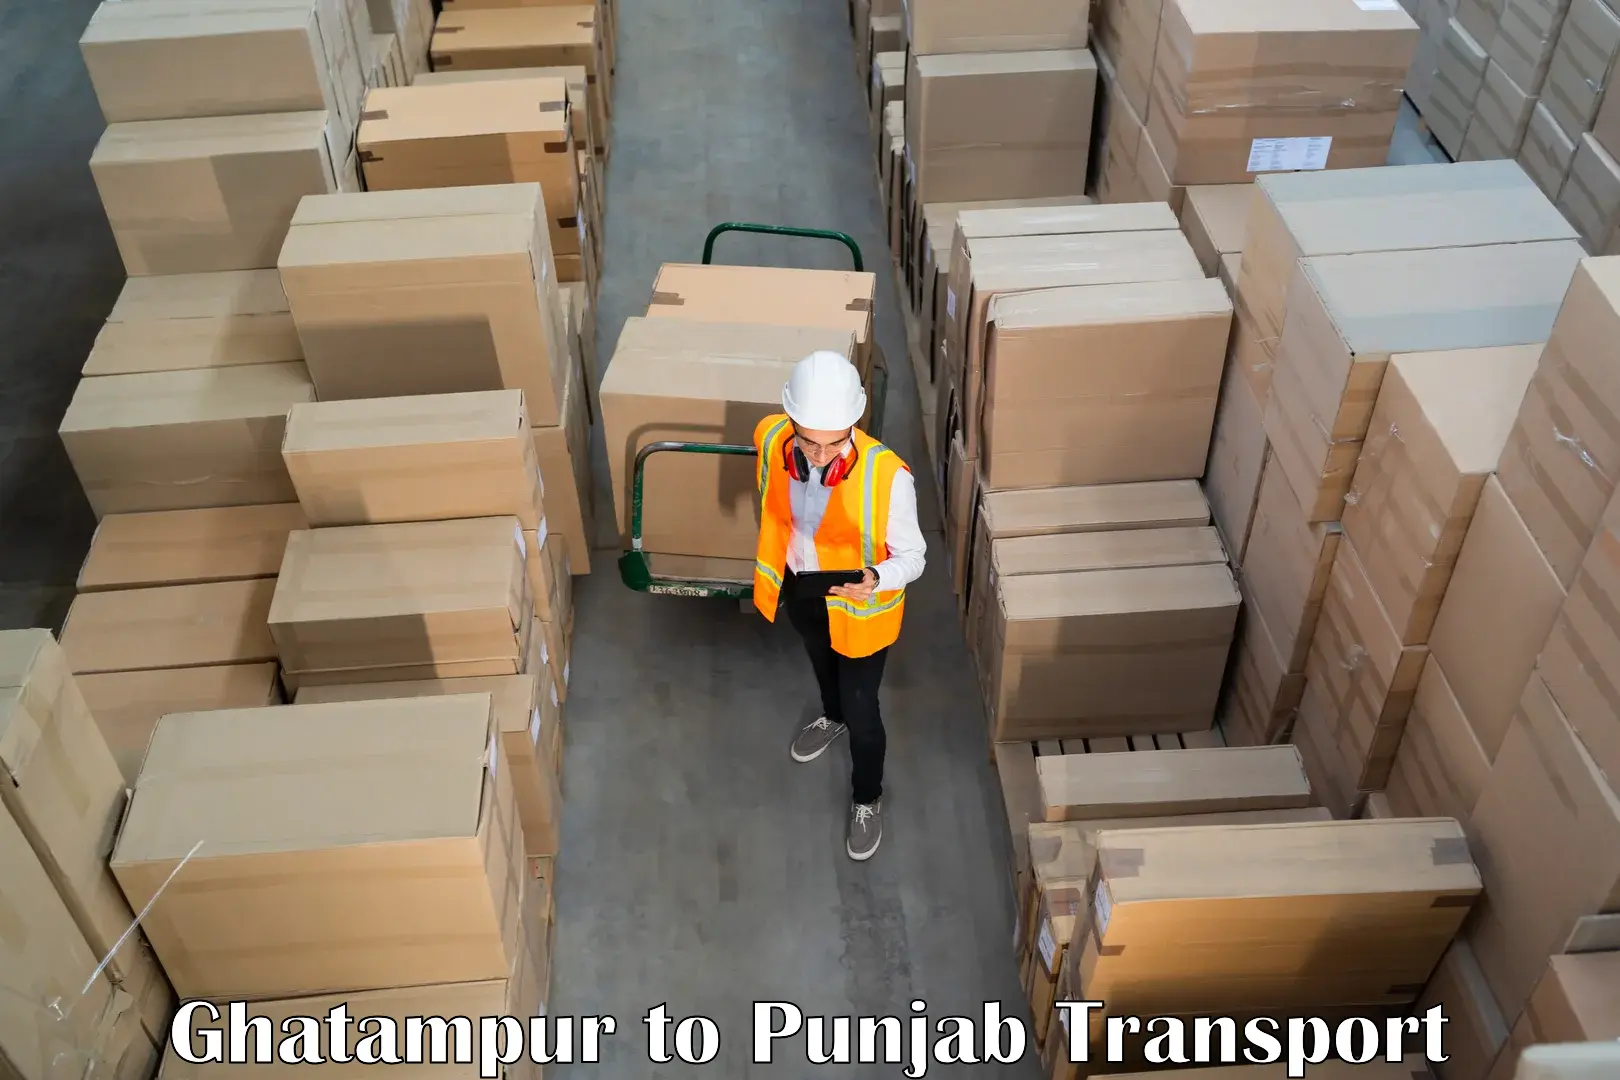 Air freight transport services Ghatampur to Goindwal Sahib